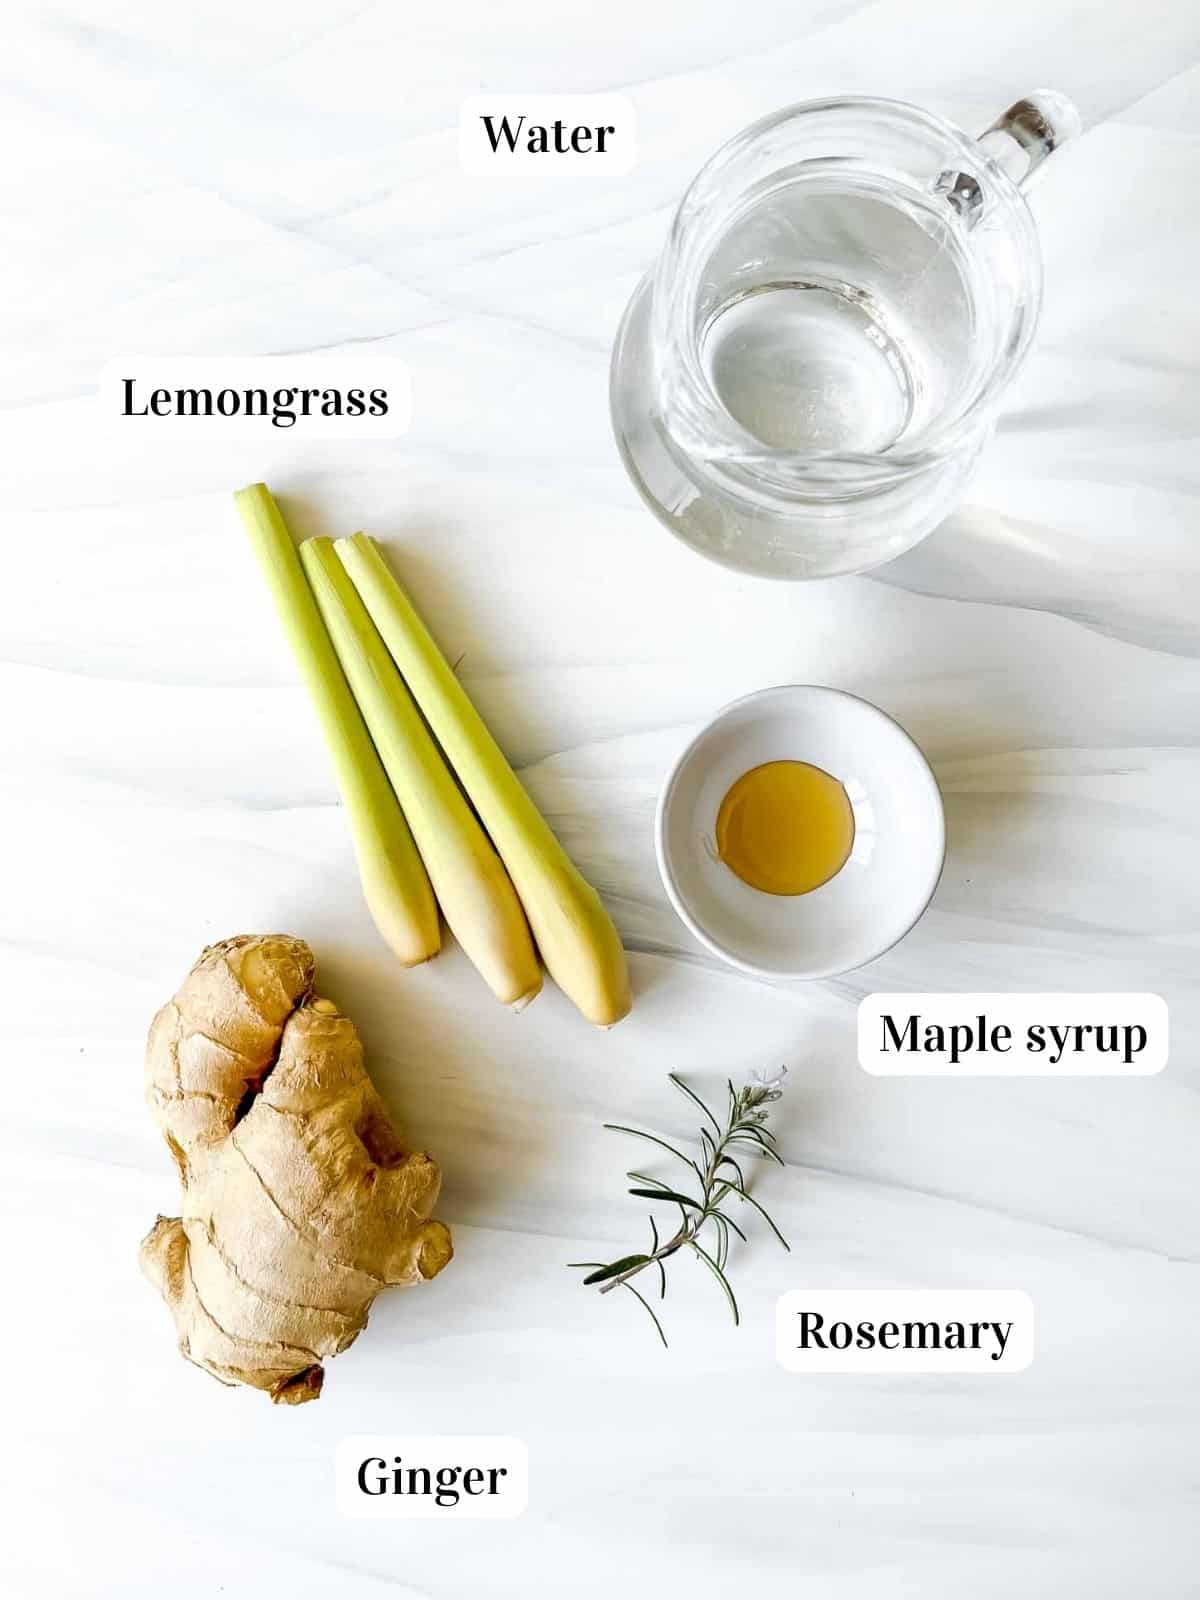 labelled lemongrass stalks, ginger, jug of water, rosemary and bowl of maple syrup.